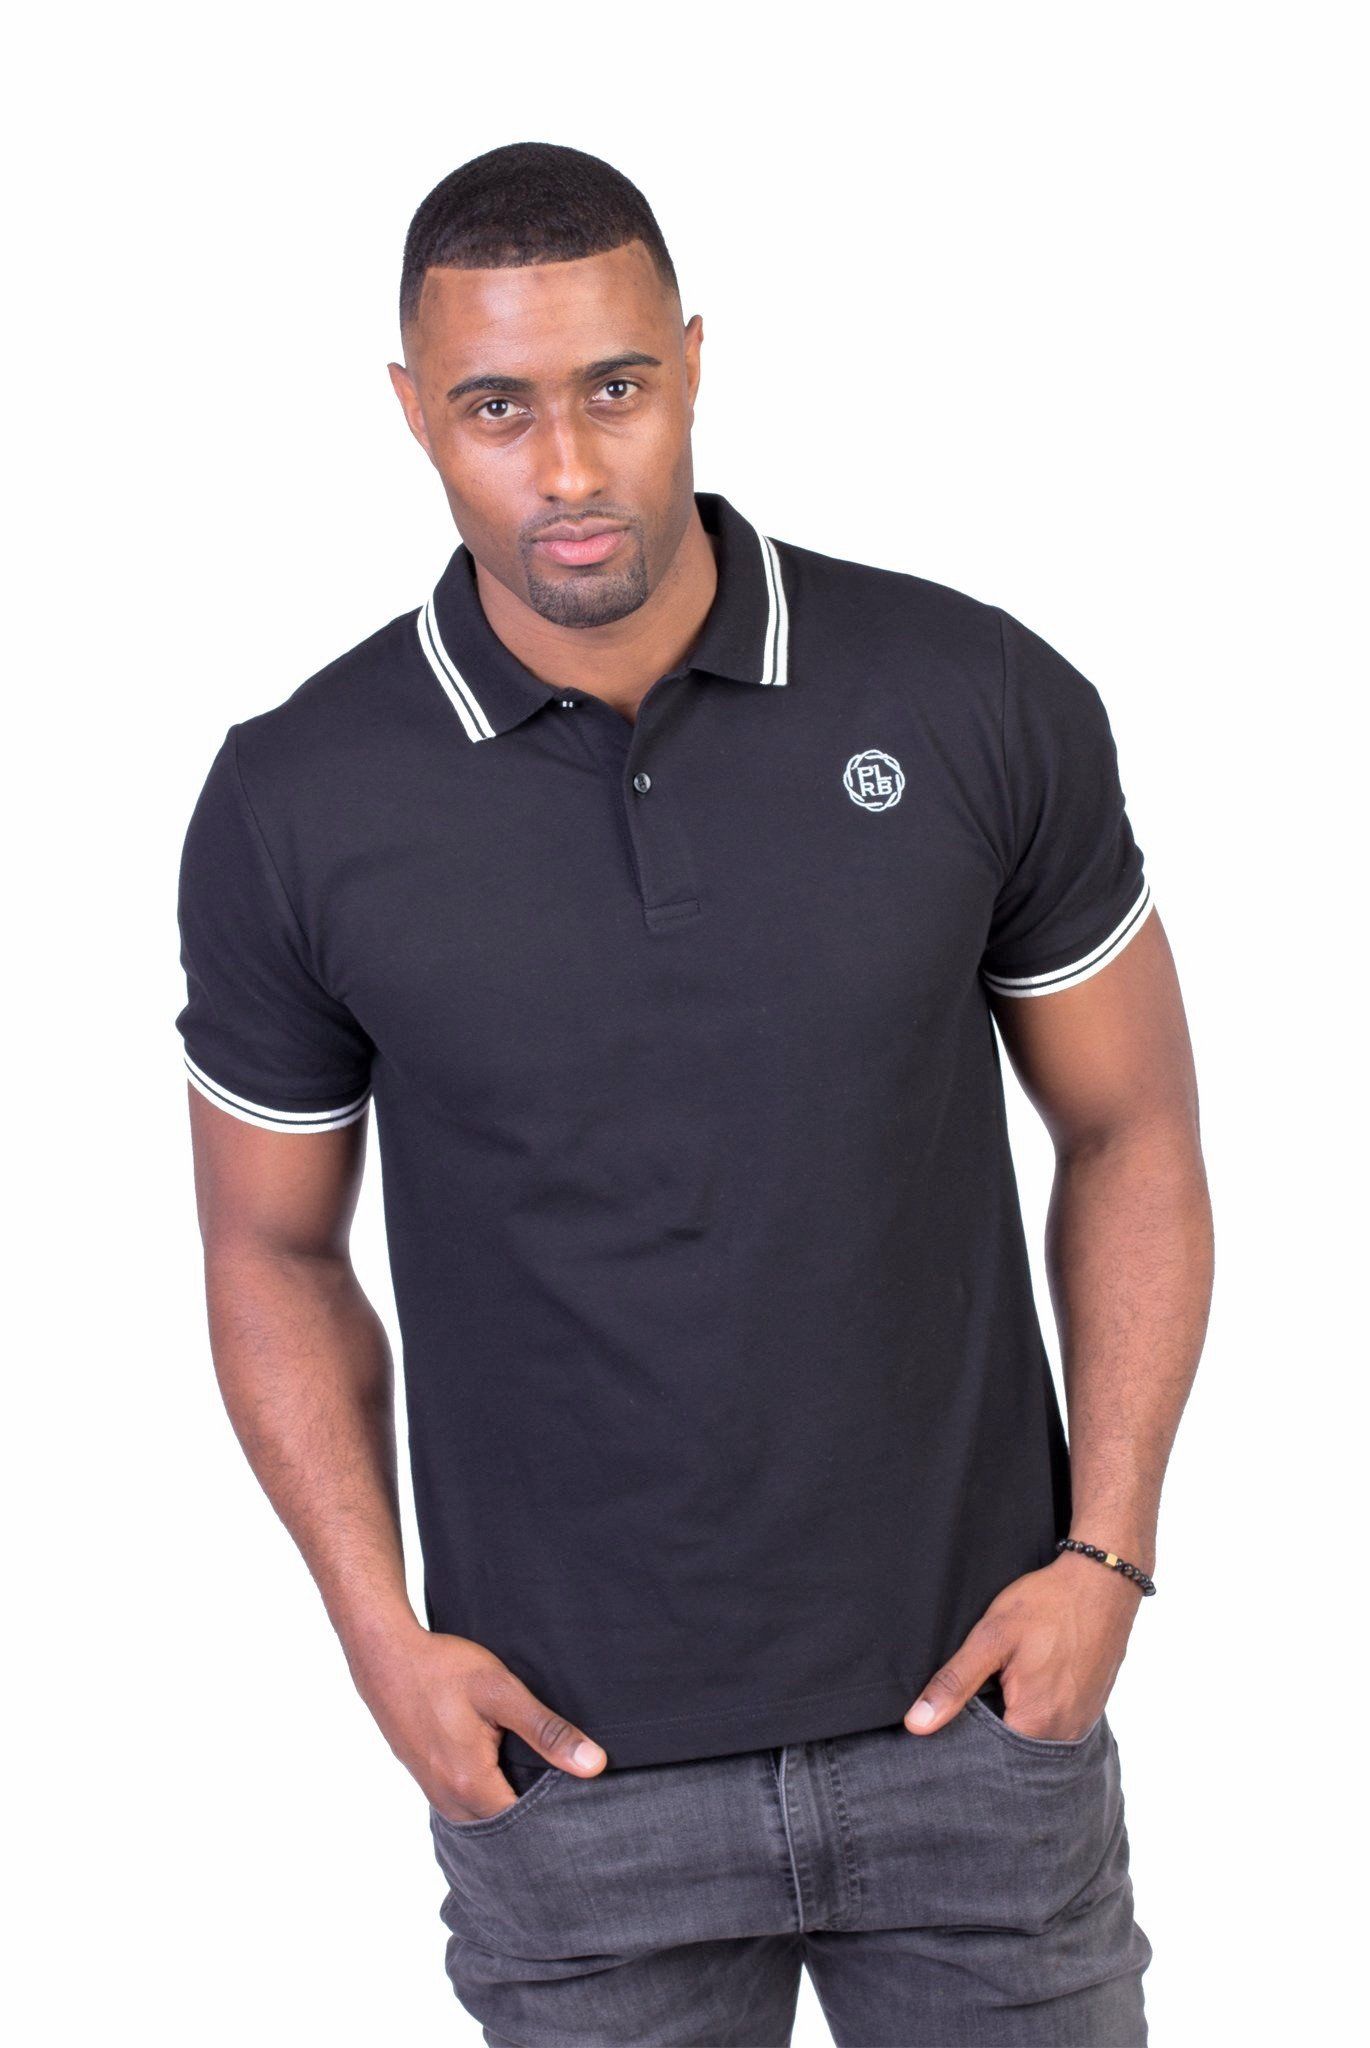 BELVEDERE POLO SHIRT IN BLACK | Poor Little Rich Boy Clothing